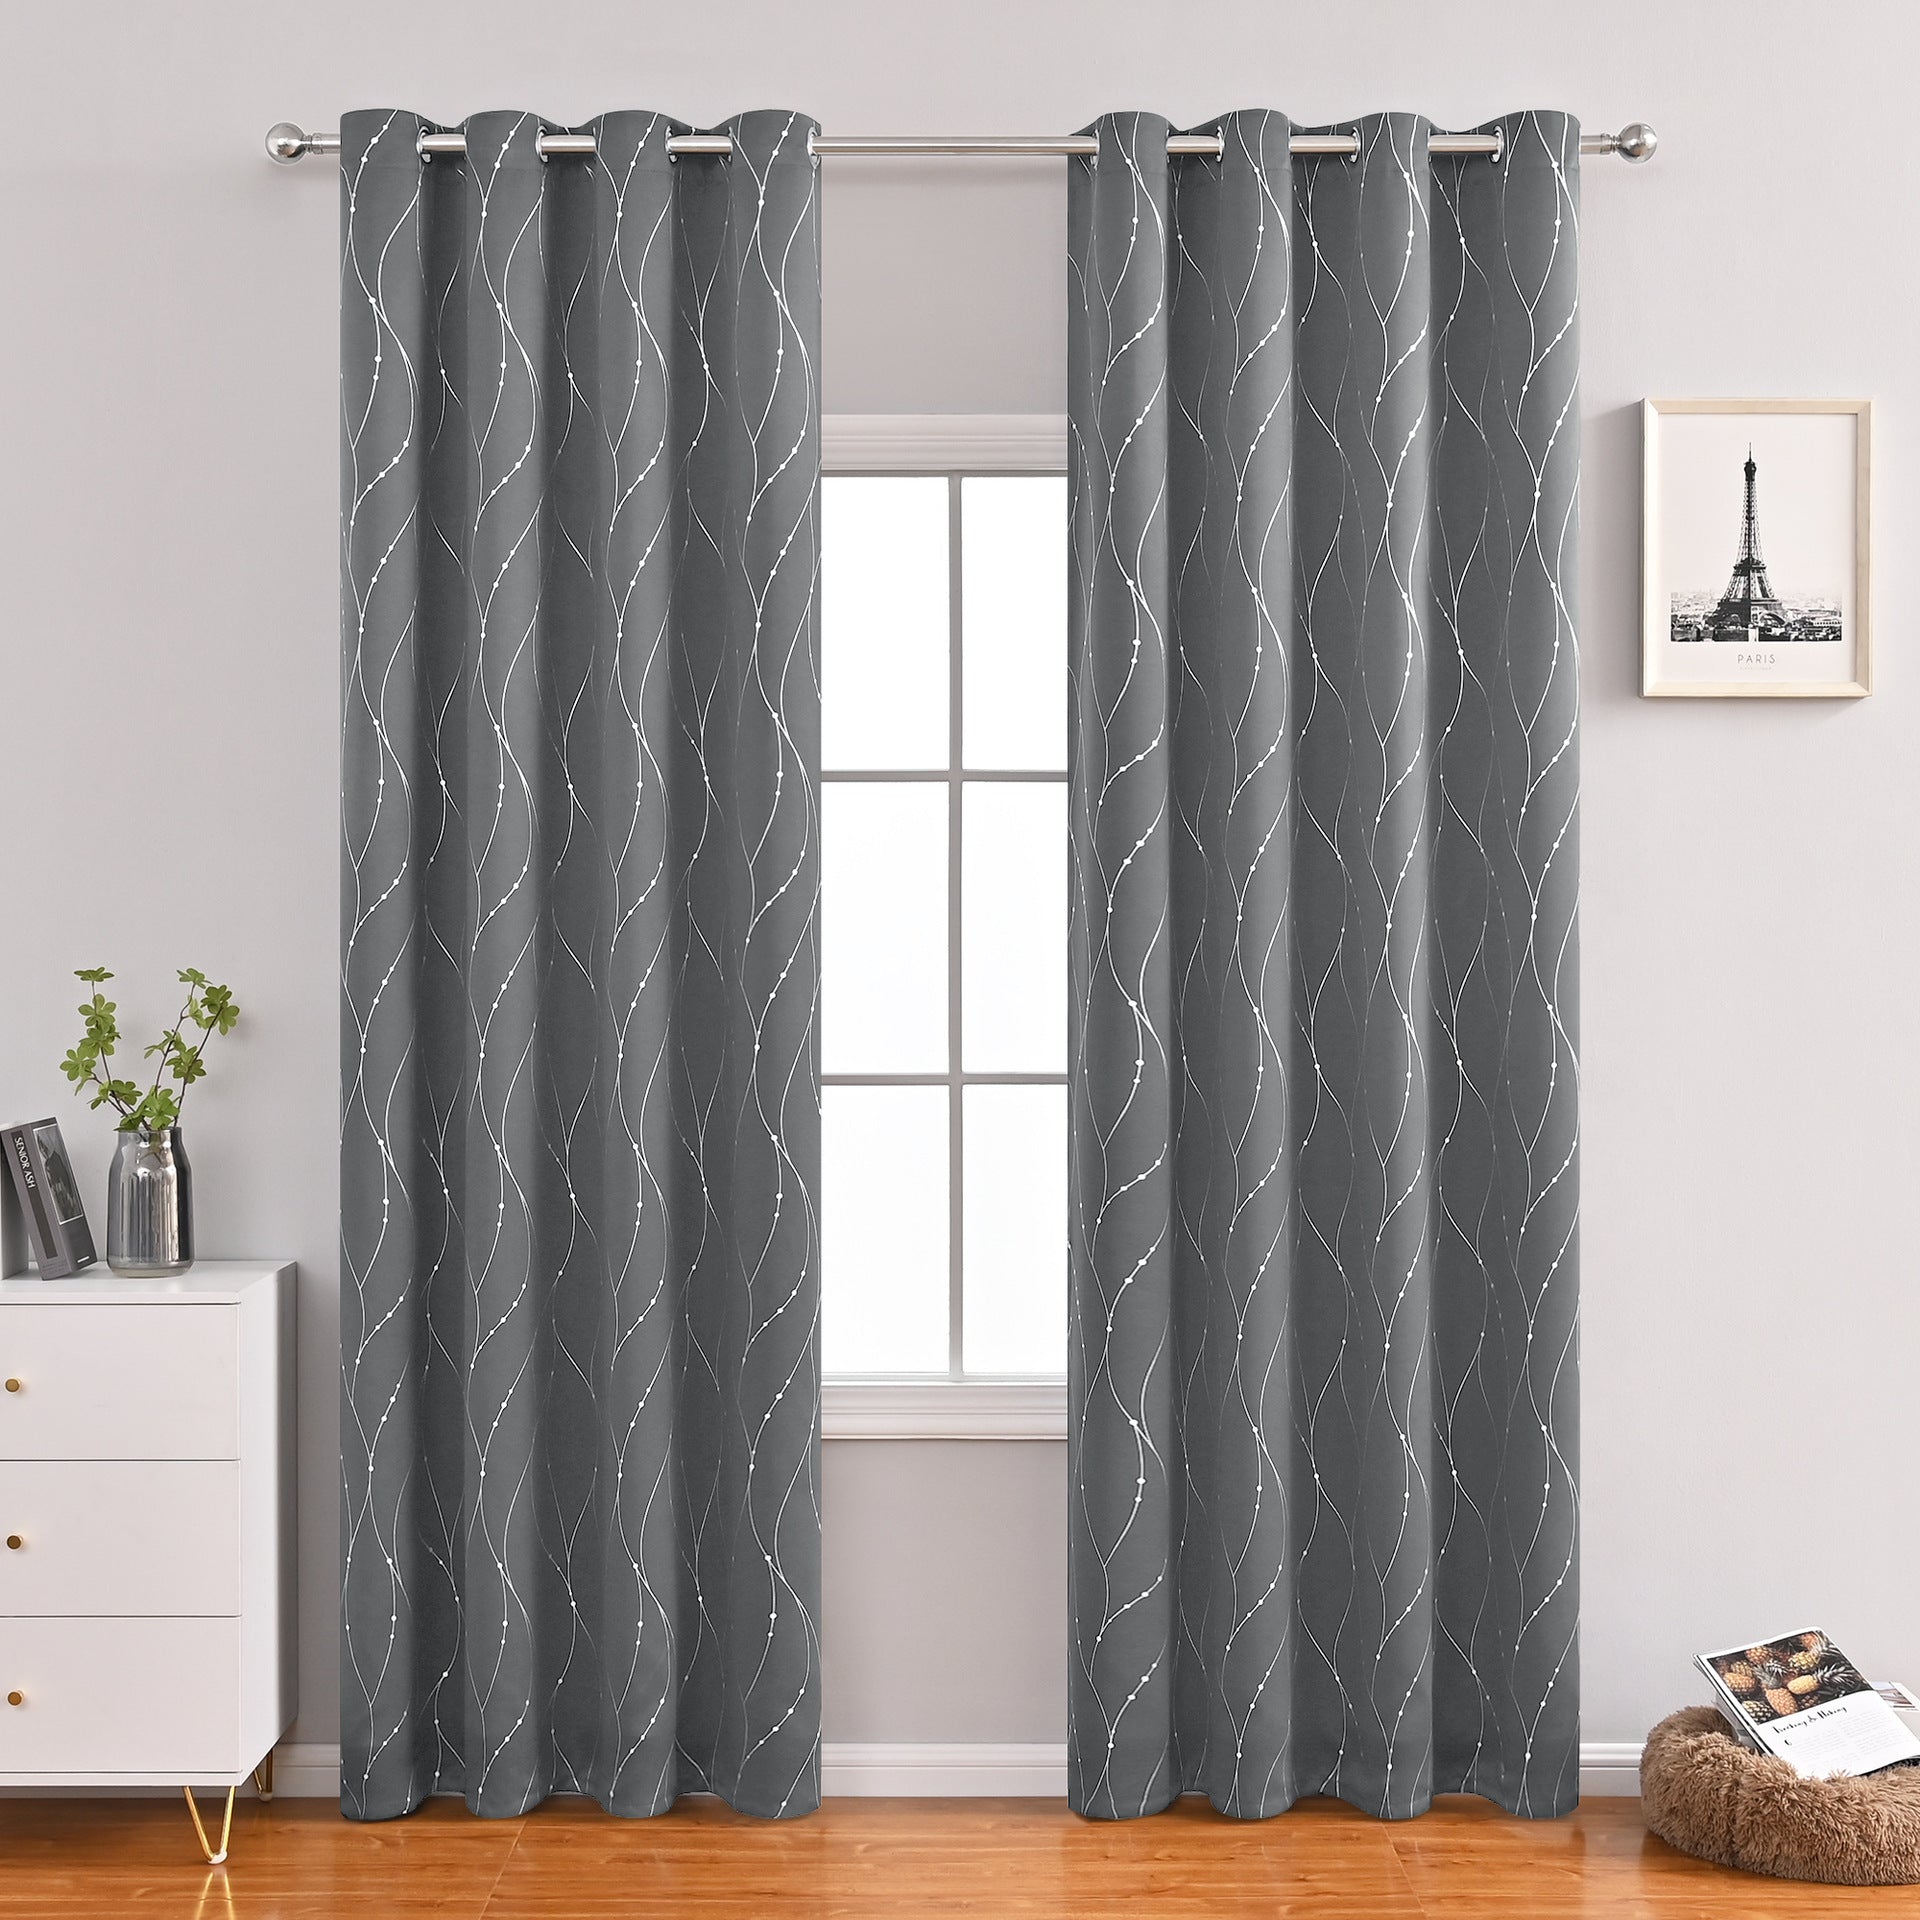 Blackout Curtains and Drapes for Living Room, 84 Inch Length, Set of 2 - Room Darkening Curtains with Wave Dots Line Print